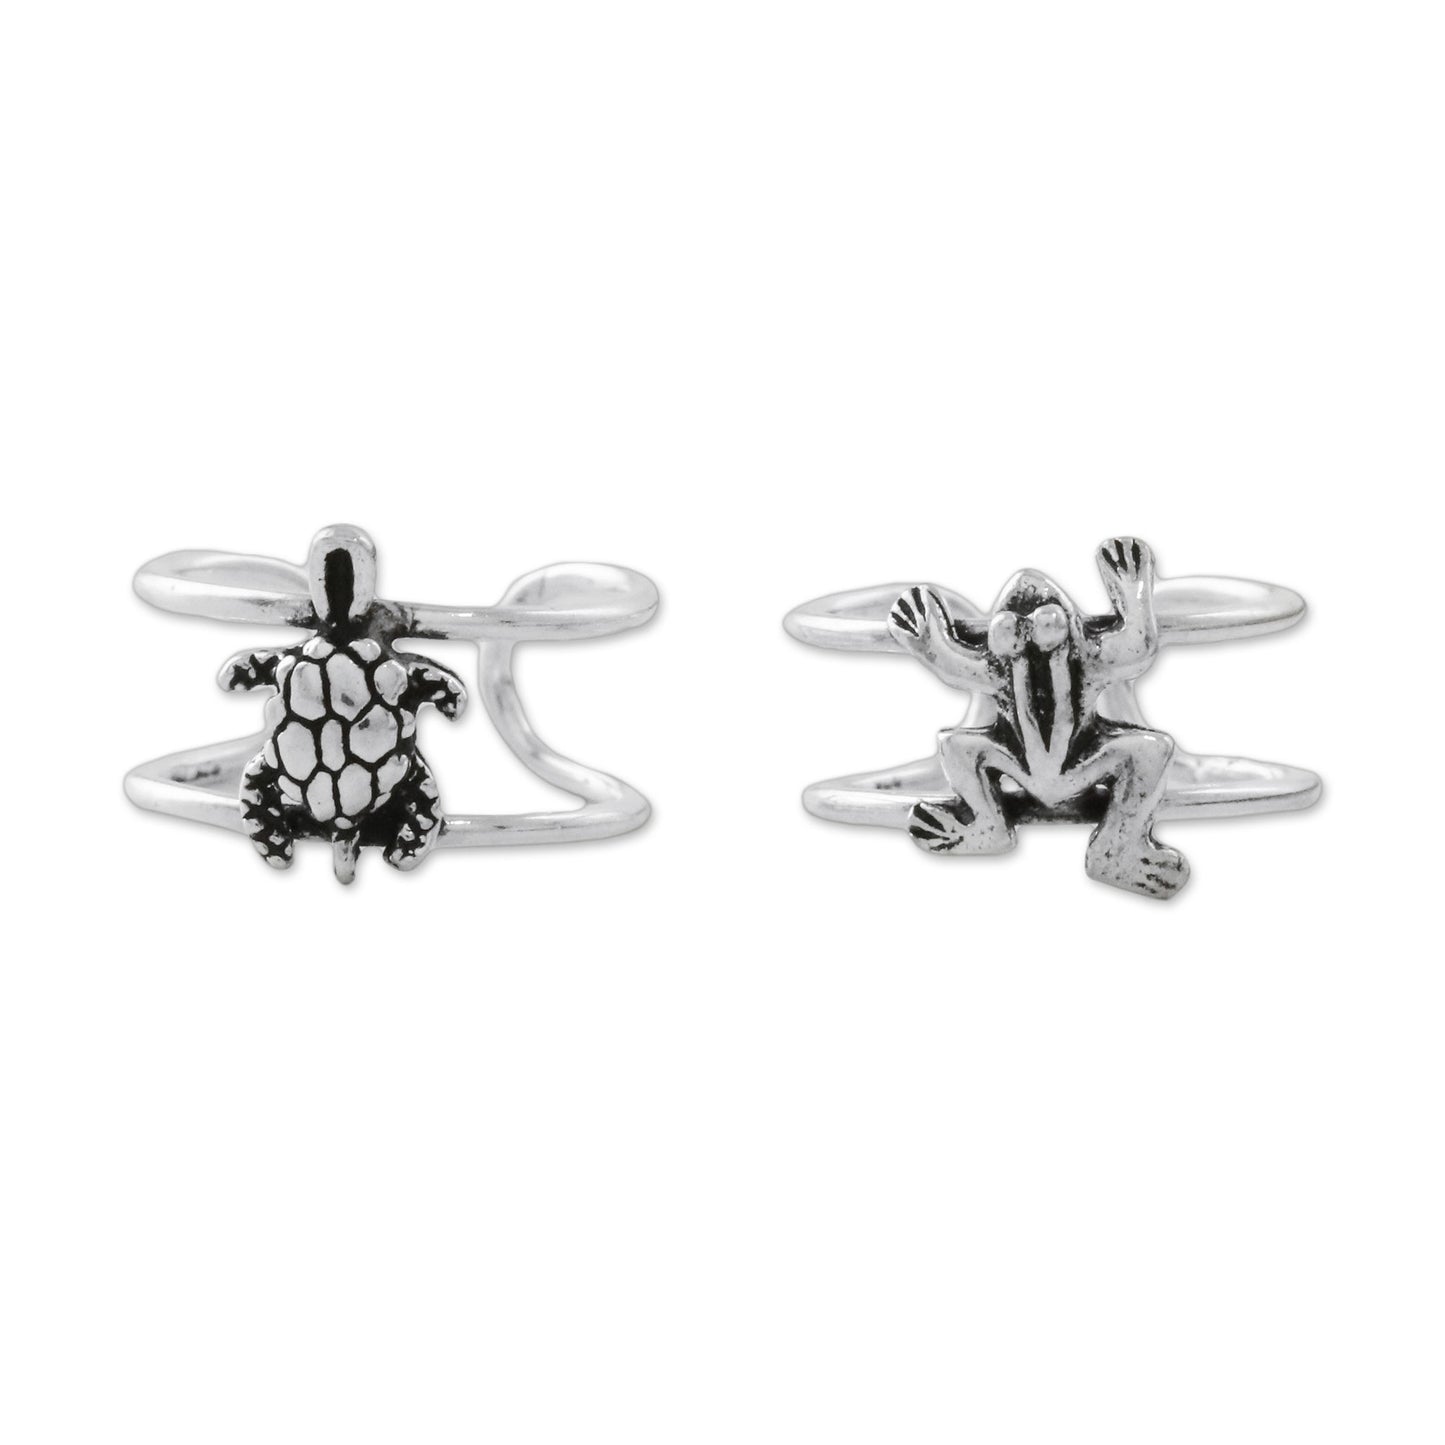 Frog and Turtle Frog and Turtle Sterling Silver Ear Cuffs from Thailand